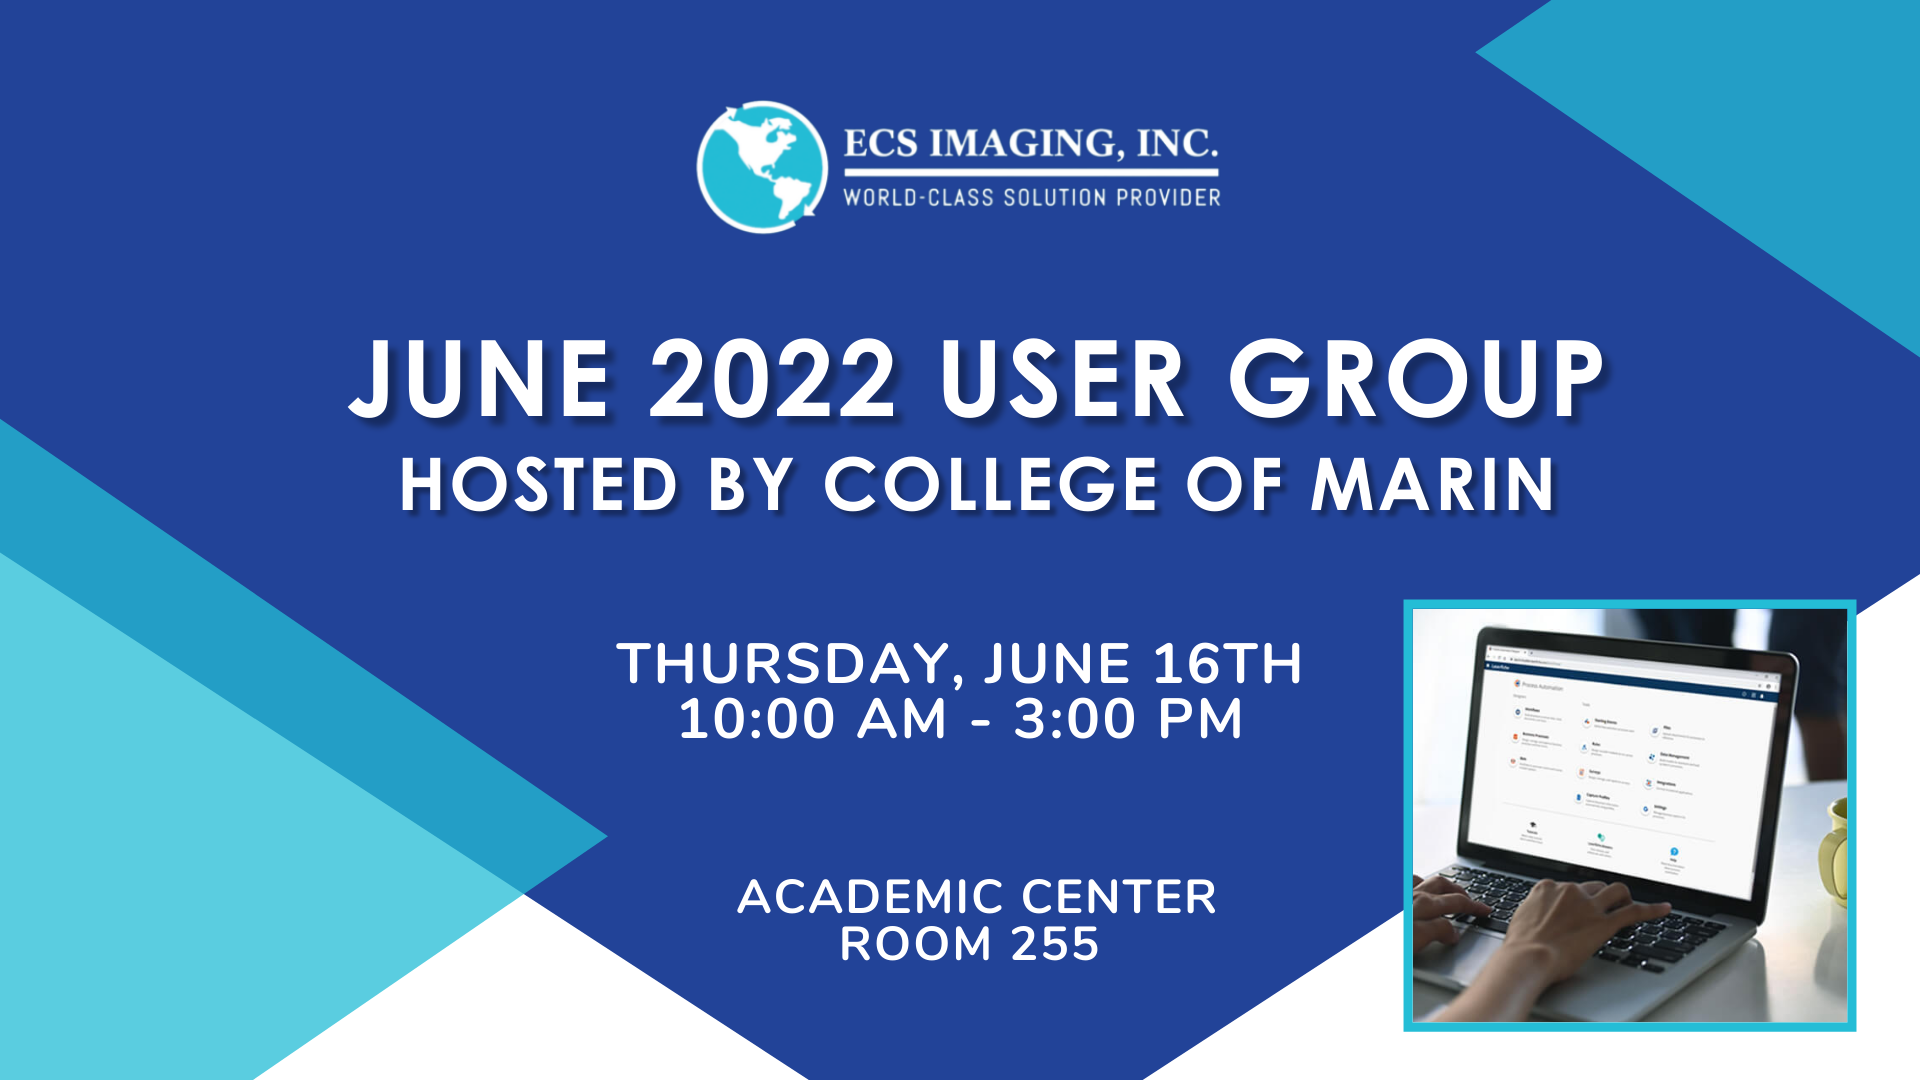 June 2022 User Group - Hosted By College of Marin